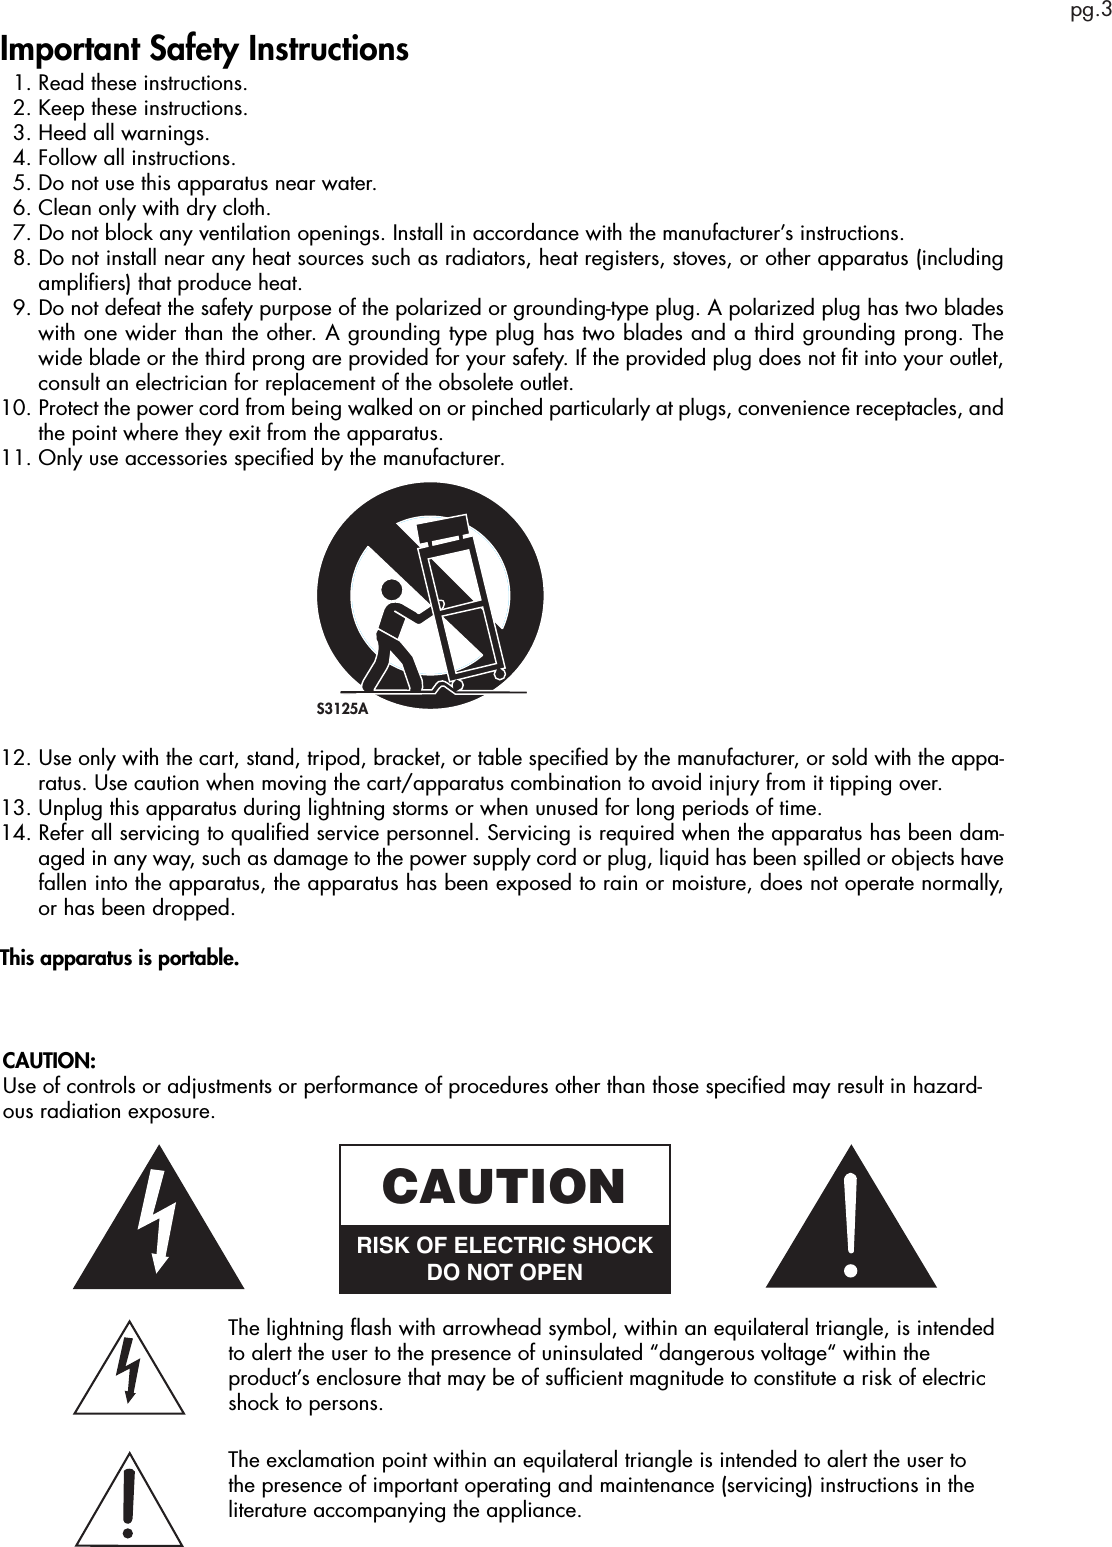 pg.3Important Safety Instructions  1. Read these instructions.  2. Keep these instructions.  3. Heed all warnings.  4. Follow all instructions.  5. Do not use this apparatus near water.  6. Clean only with dry cloth.  7.  Do not block any ventilation openings. Install in accordance with the manufacturer’s instructions.  8.  Do not install near any heat sources such as radiators, heat registers, stoves, or other apparatus (including ampliﬁers) that produce heat.  9.  Do not defeat the safety purpose of the polarized or grounding-type plug. A polarized plug has two blades with one wider than the other. A grounding type plug has two blades and a third grounding prong. The wide blade or the third prong are provided for your safety. If the provided plug does not ﬁt into your outlet, consult an electrician for replacement of the obsolete outlet.10.  Protect the power cord from being walked on or pinched particularly at plugs, convenience receptacles, and the point where they exit from the apparatus.11. Only use accessories speciﬁed by the manufacturer.12.  Use only with the cart, stand, tripod, bracket, or table speciﬁed by the manufacturer, or sold with the appa-ratus. Use caution when moving the cart/apparatus combination to avoid injury from it tipping over.13. Unplug this apparatus during lightning storms or when unused for long periods of time.14.  Refer all servicing to qualiﬁed service personnel. Servicing is required when the apparatus has been dam-aged in any way, such as damage to the power supply cord or plug, liquid has been spilled or objects have fallen into the apparatus, the apparatus has been exposed to rain or moisture, does not operate normally, or has been dropped.This apparatus is portable. S3125AThe lightning ﬂash with arrowhead symbol, within an equilateral triangle, is intended to alert the user to the presence of uninsulated “dangerous voltage“ within the product’s enclosure that may be of sufﬁcient magnitude to constitute a risk of electric shock to persons.The exclamation point within an equilateral triangle is intended to alert the user to the presence of important operating and maintenance (servicing) instructions in the literature accompanying the appliance.CAUTIONRISK OF ELECTRIC SHOCKDO NOT OPENCAUTION:Use of controls or adjustments or performance of procedures other than those speciﬁed may result in hazard-ous radiation exposure.